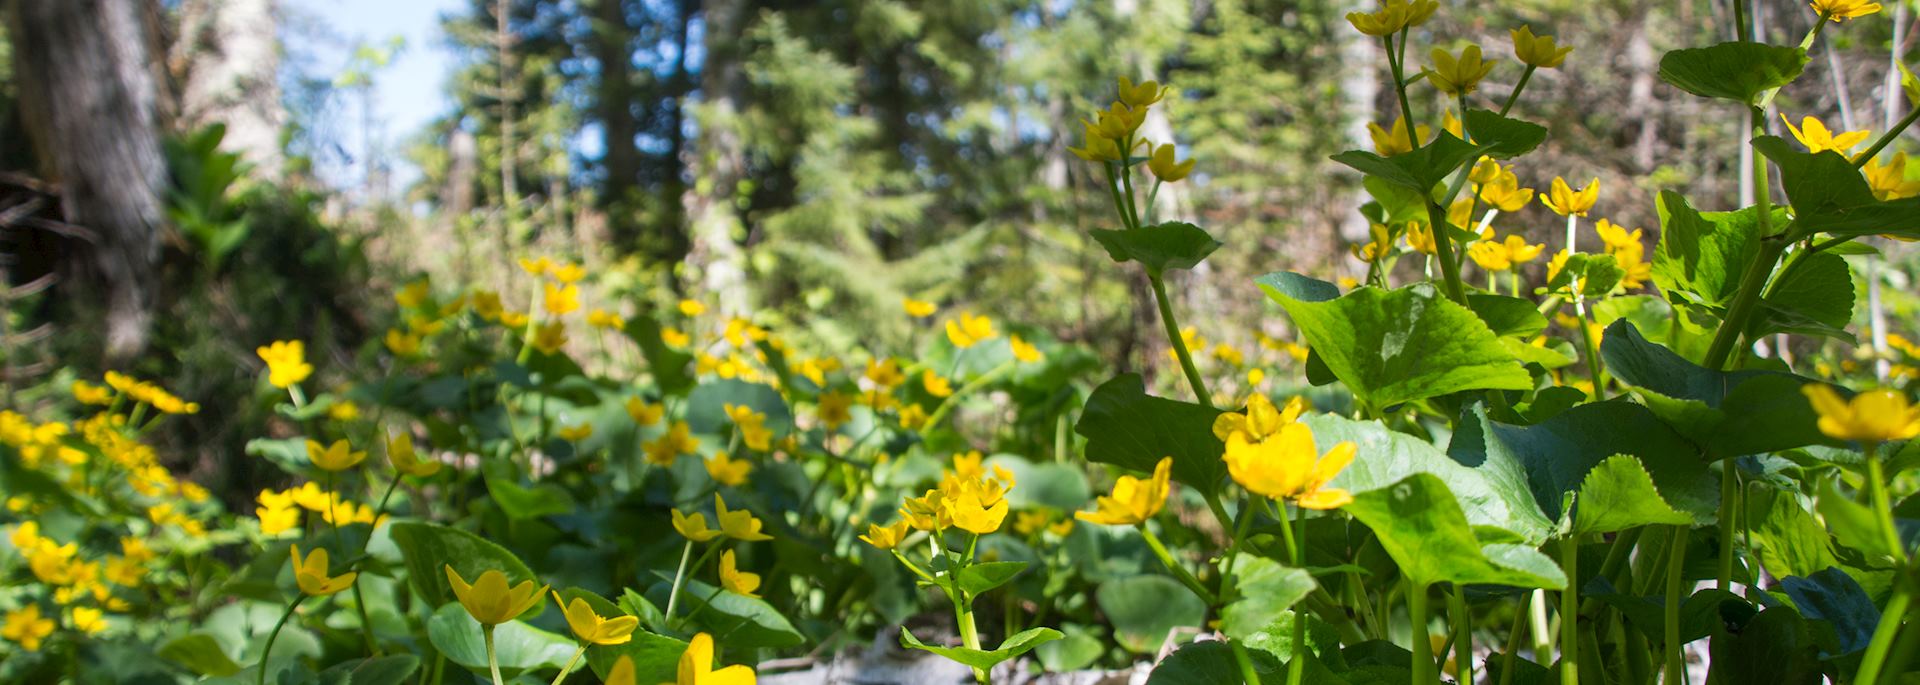 Flowers in Isle Royale National Park